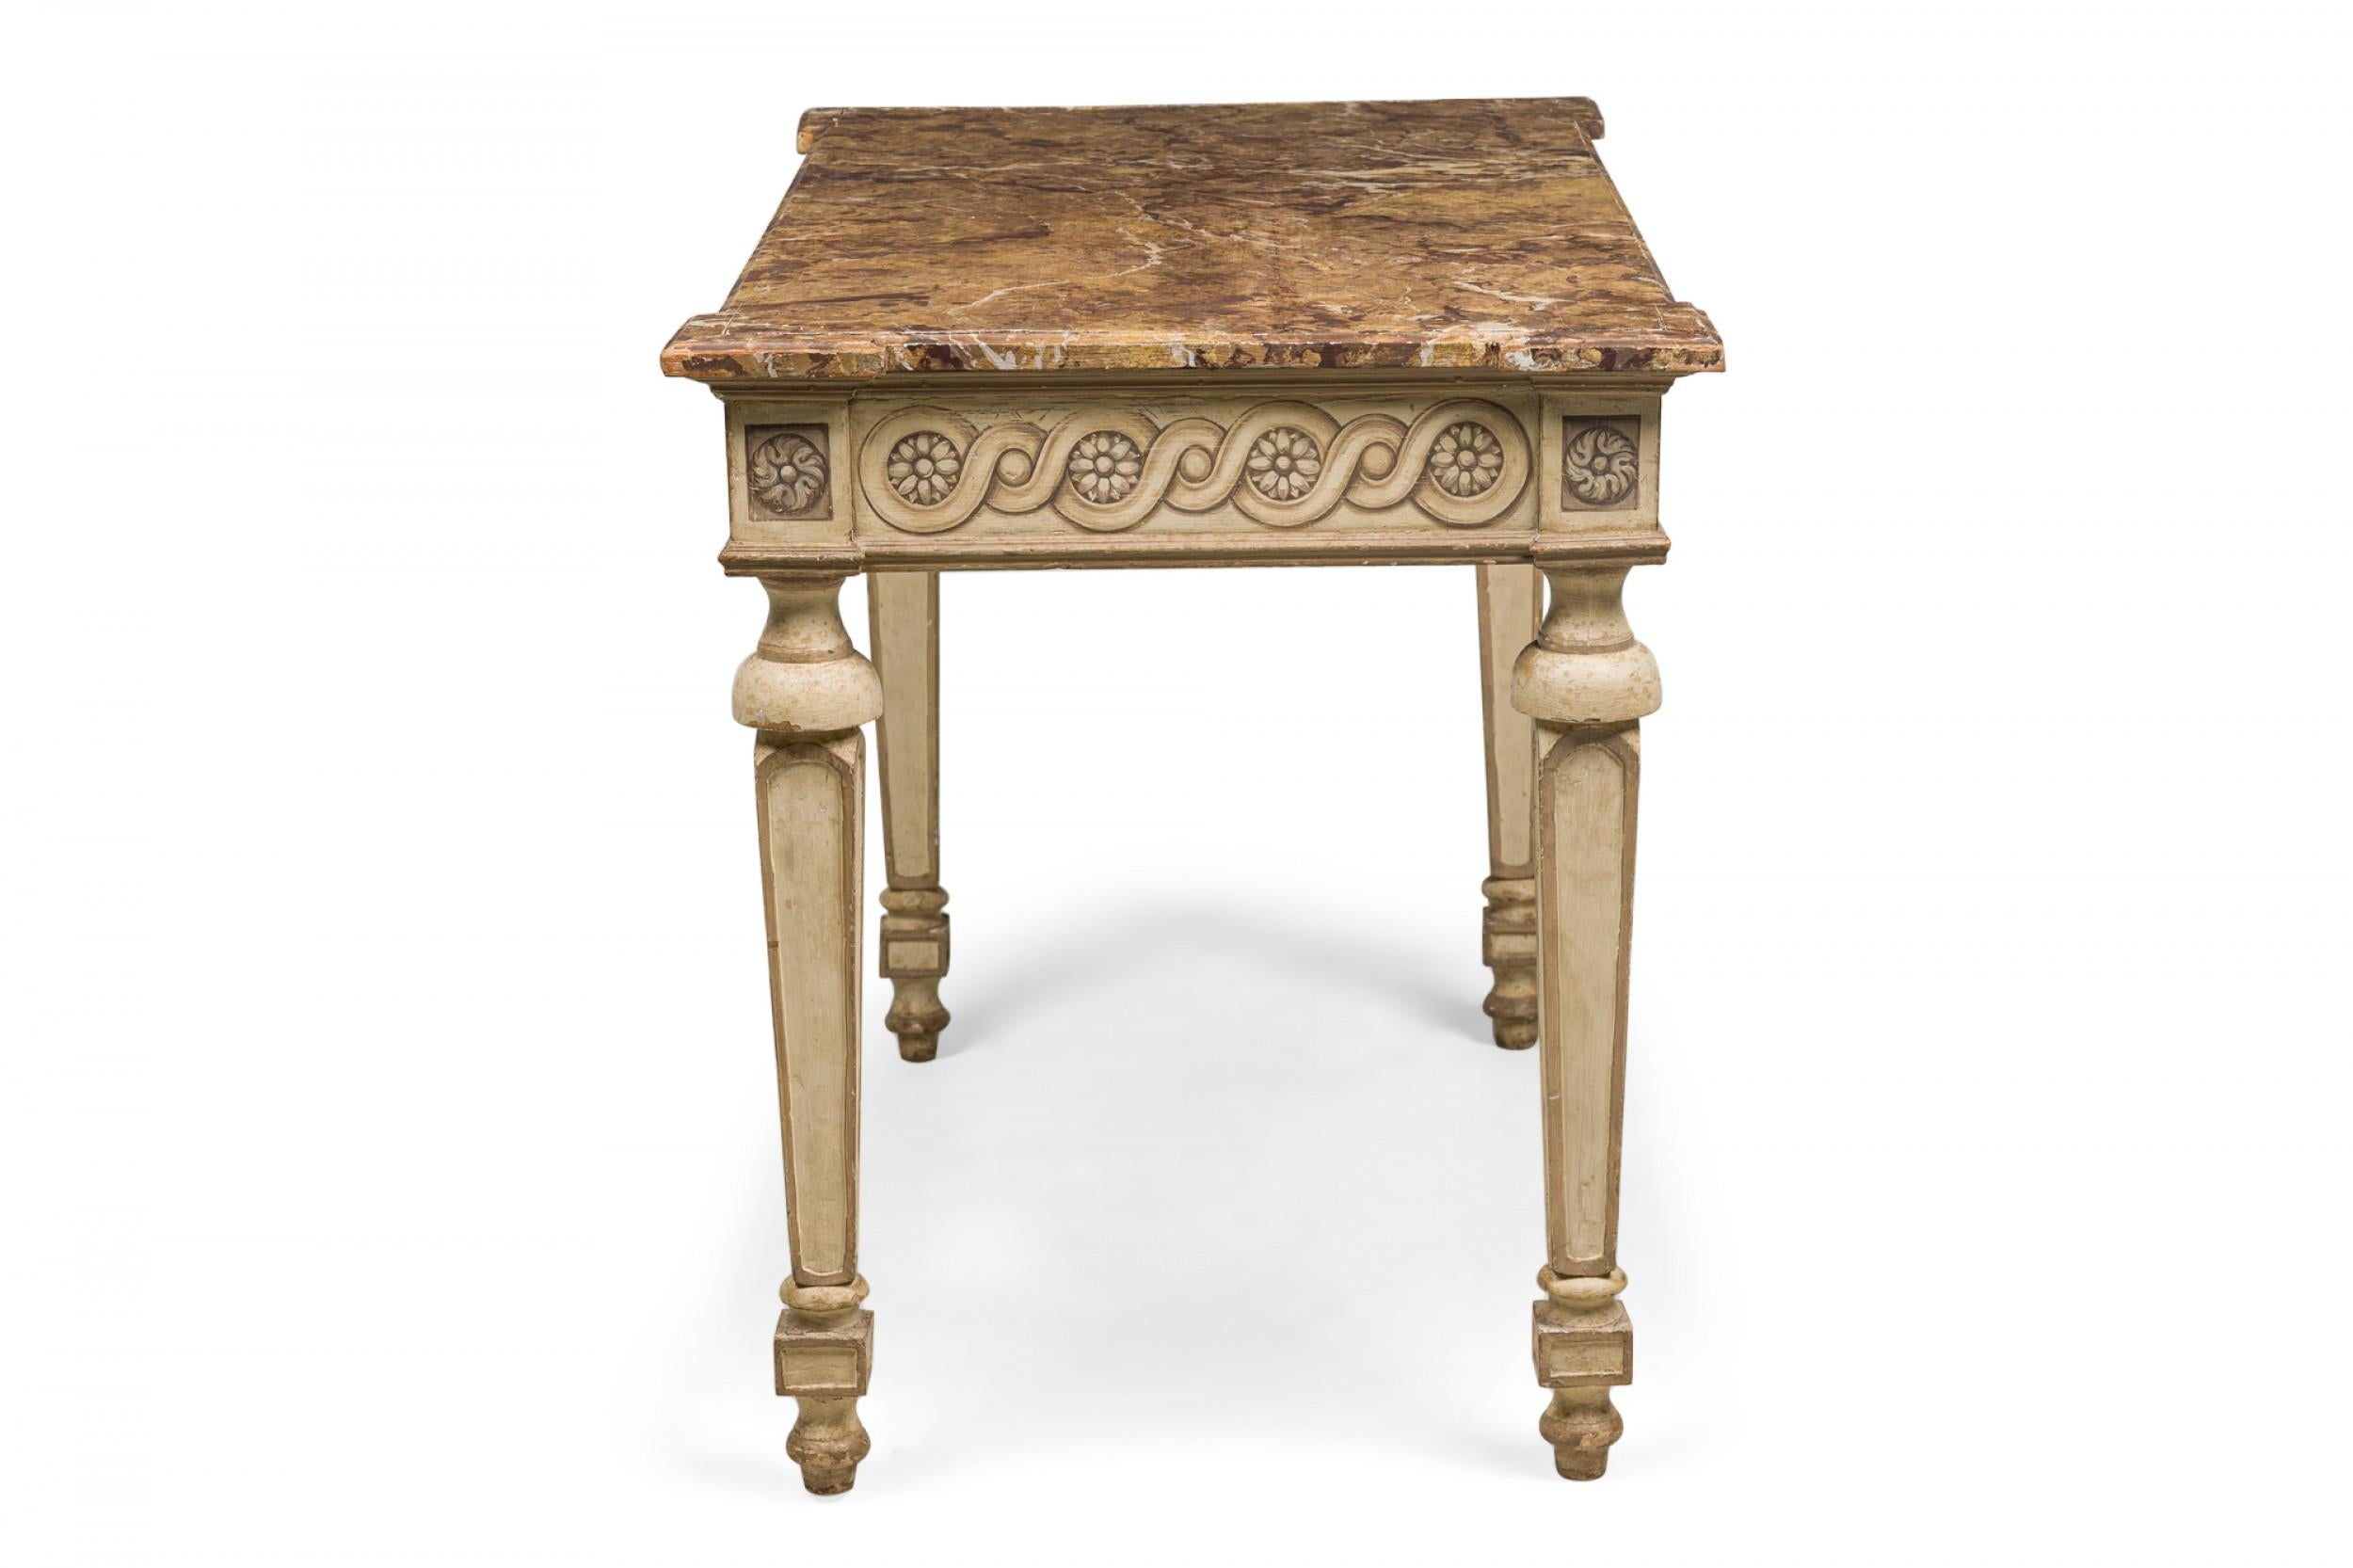 Neoclassical Italian Neoclassic Beige Painted & Parcel-Gilt Console / Center Table For Sale